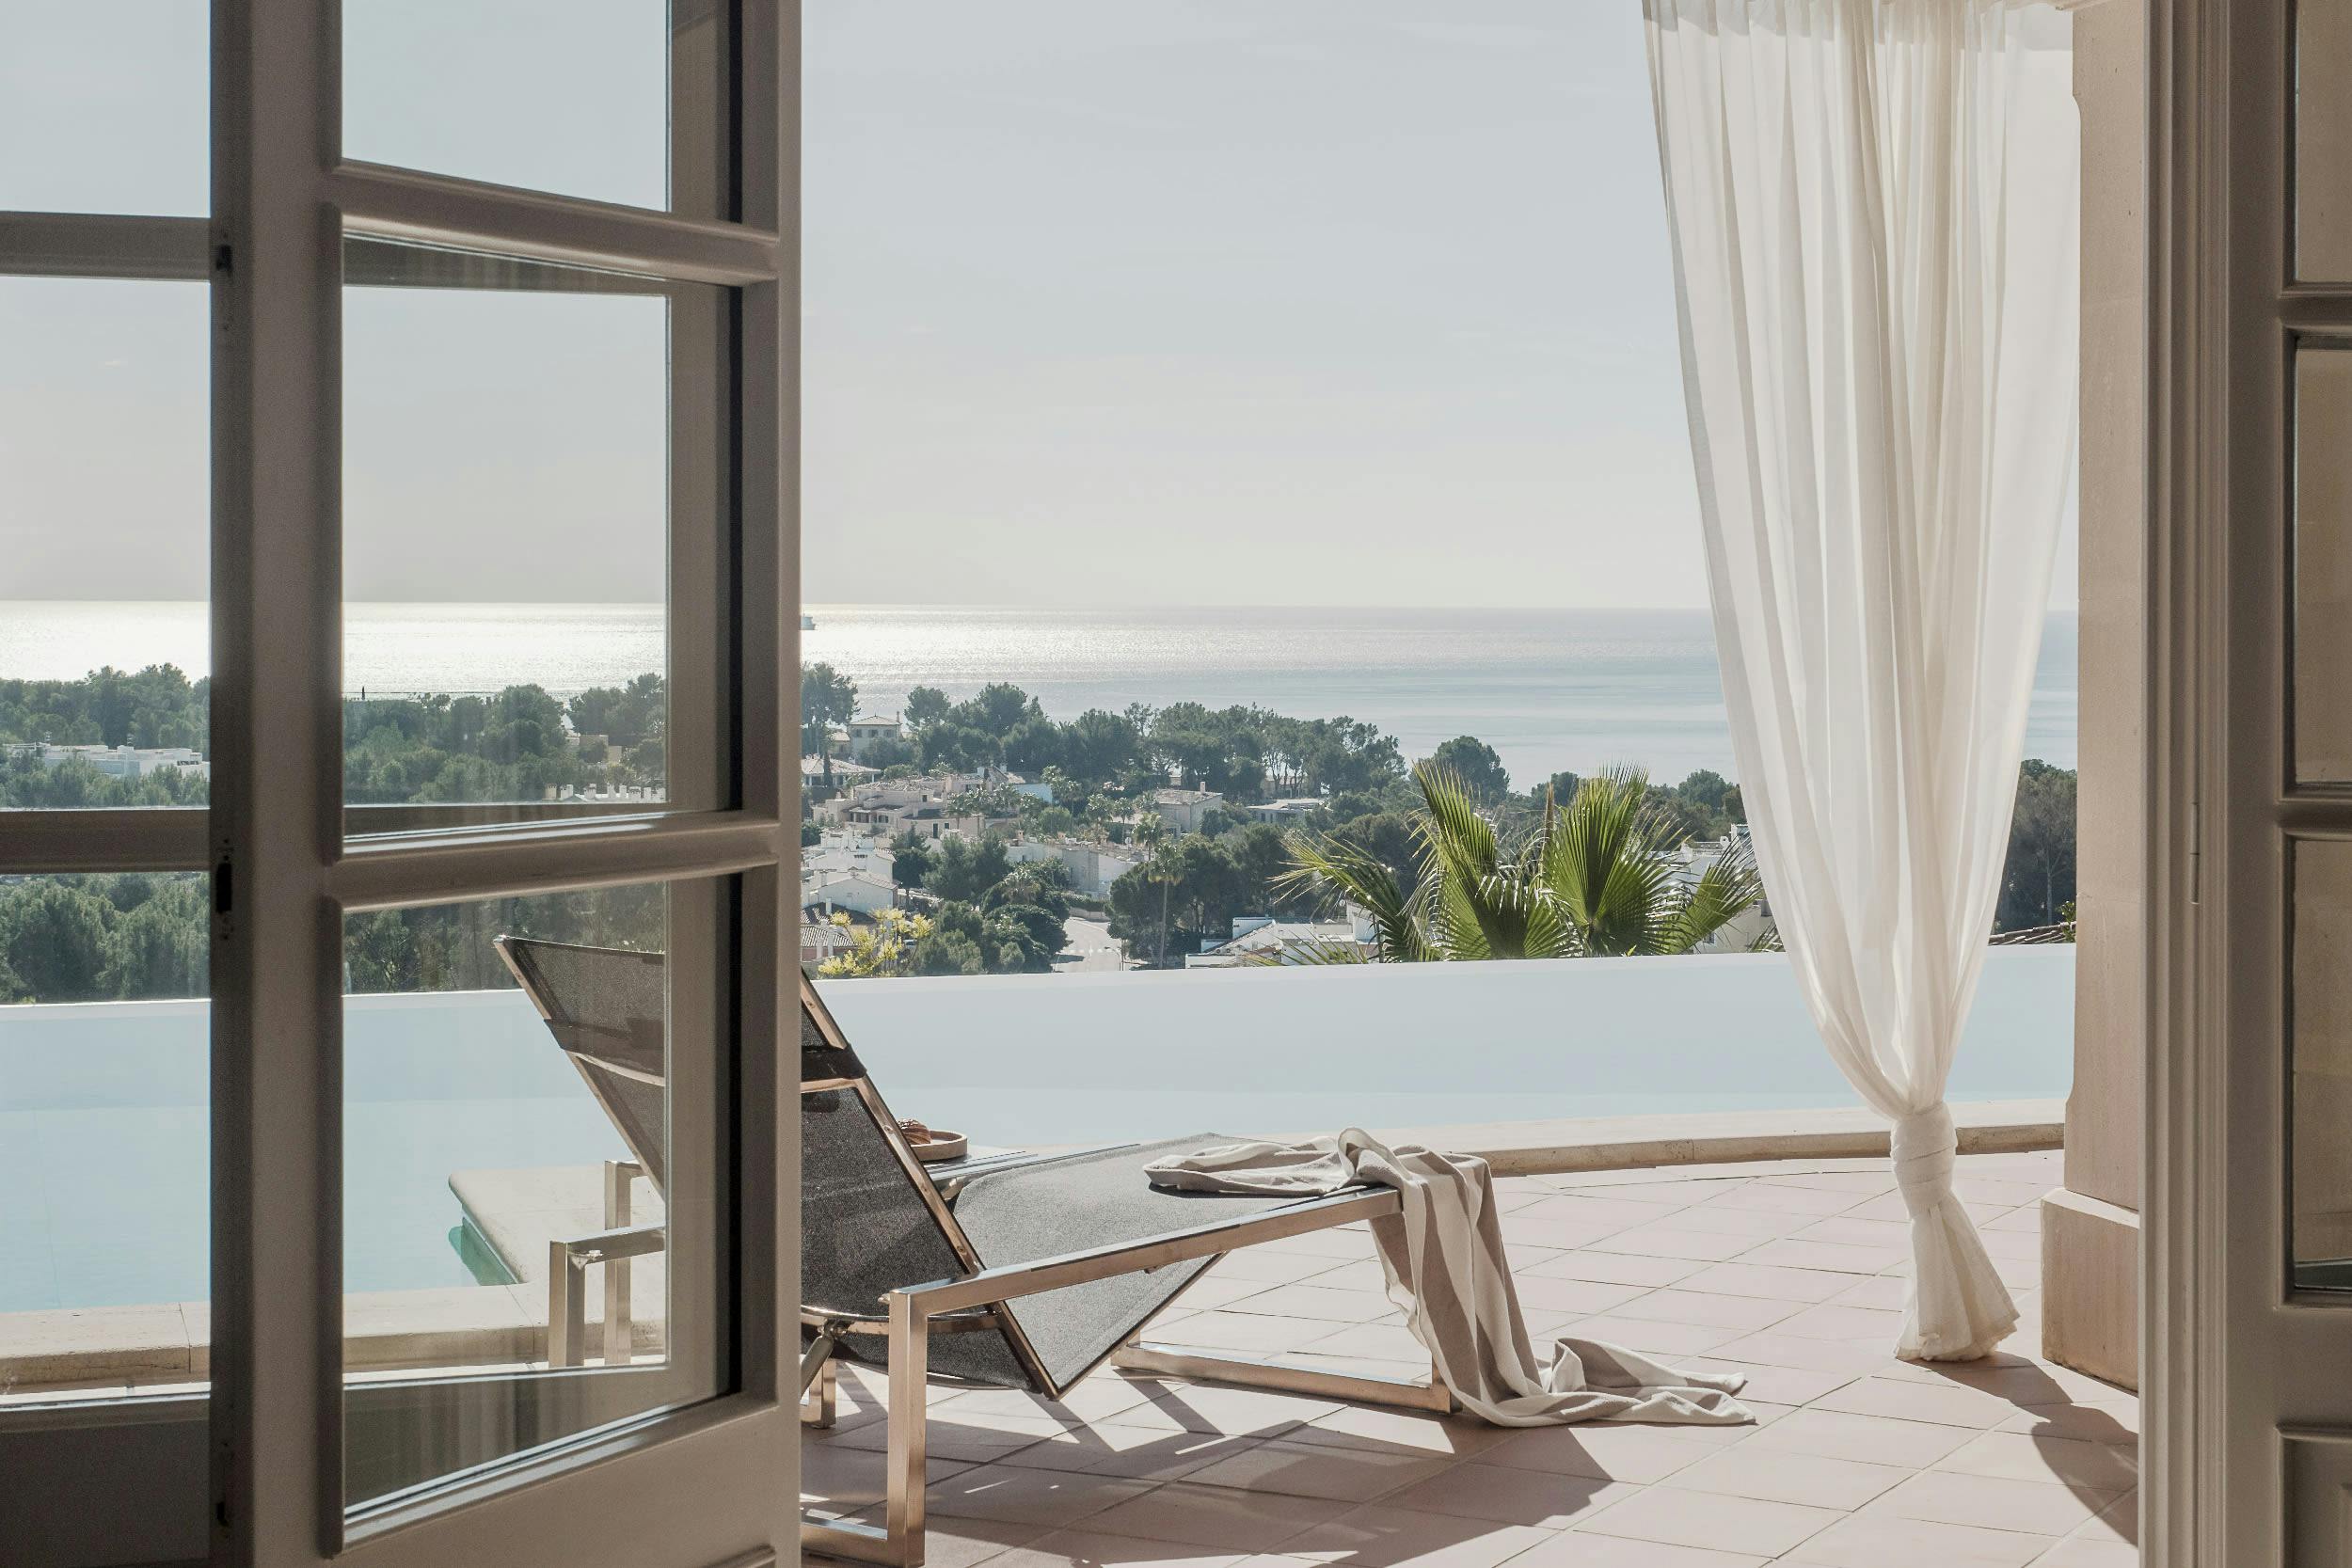 The image features a large, open patio with a view of the ocean. The patio is furnished with a lounge chair and a white lawn chair, both placed near a large window that offers a stunning ocean view. The chair is positioned close to the window, allowing the occupants to enjoy the scenery while relaxing.

In the background, there are several boats visible on the water, adding to the picturesque scene. The patio is surrounded by palm trees, creating a serene and inviting atmosphere.